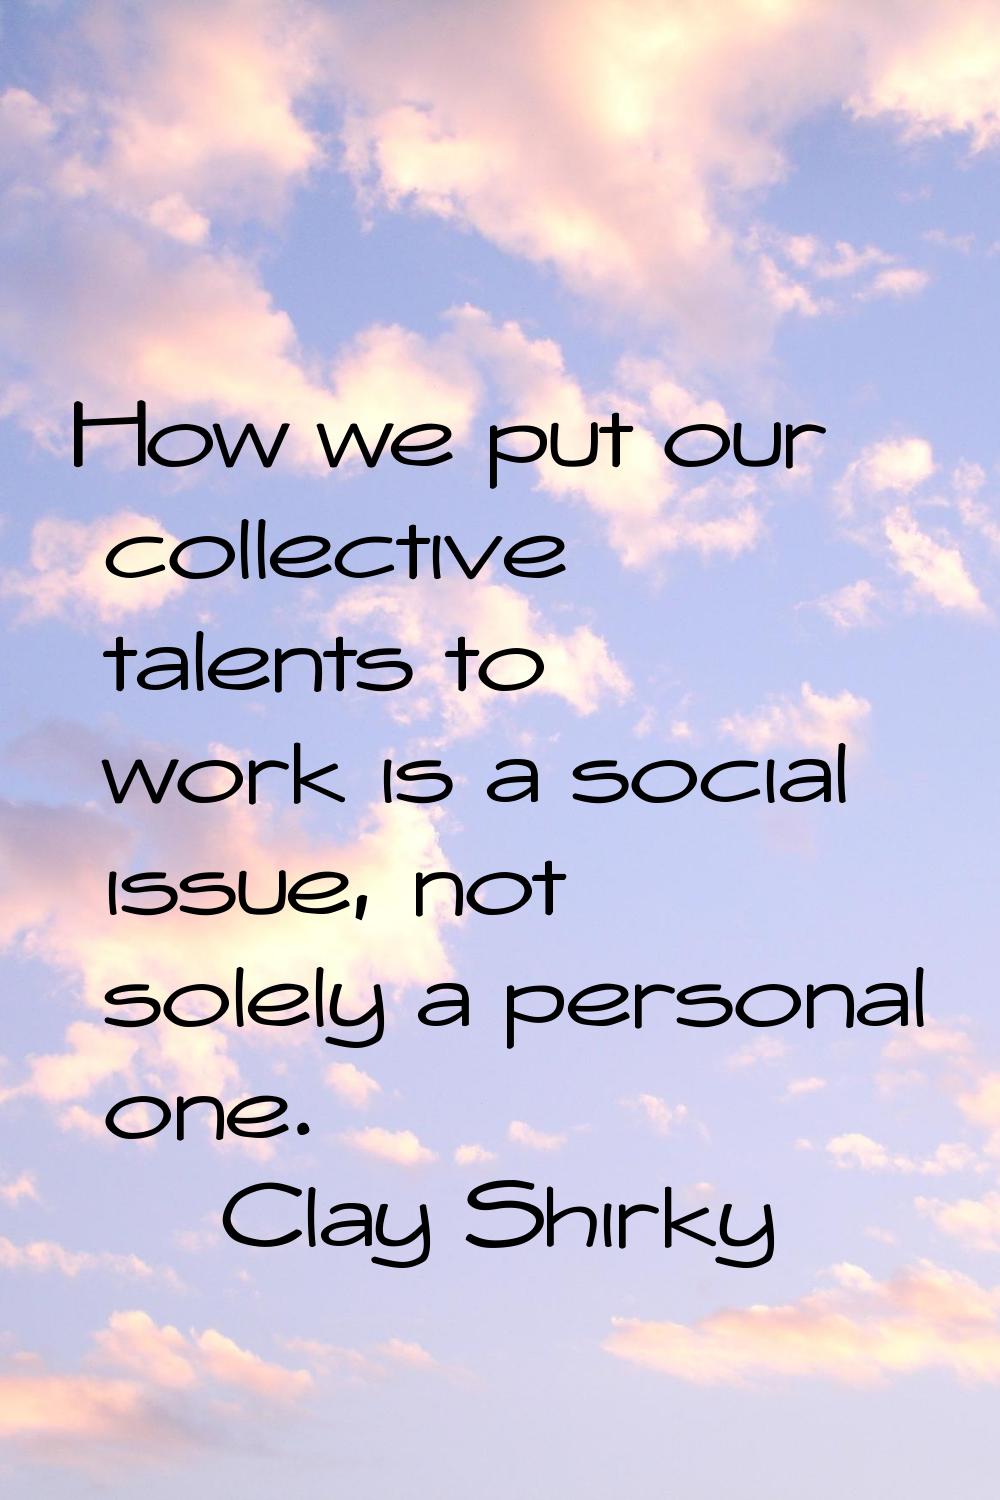 How we put our collective talents to work is a social issue, not solely a personal one.